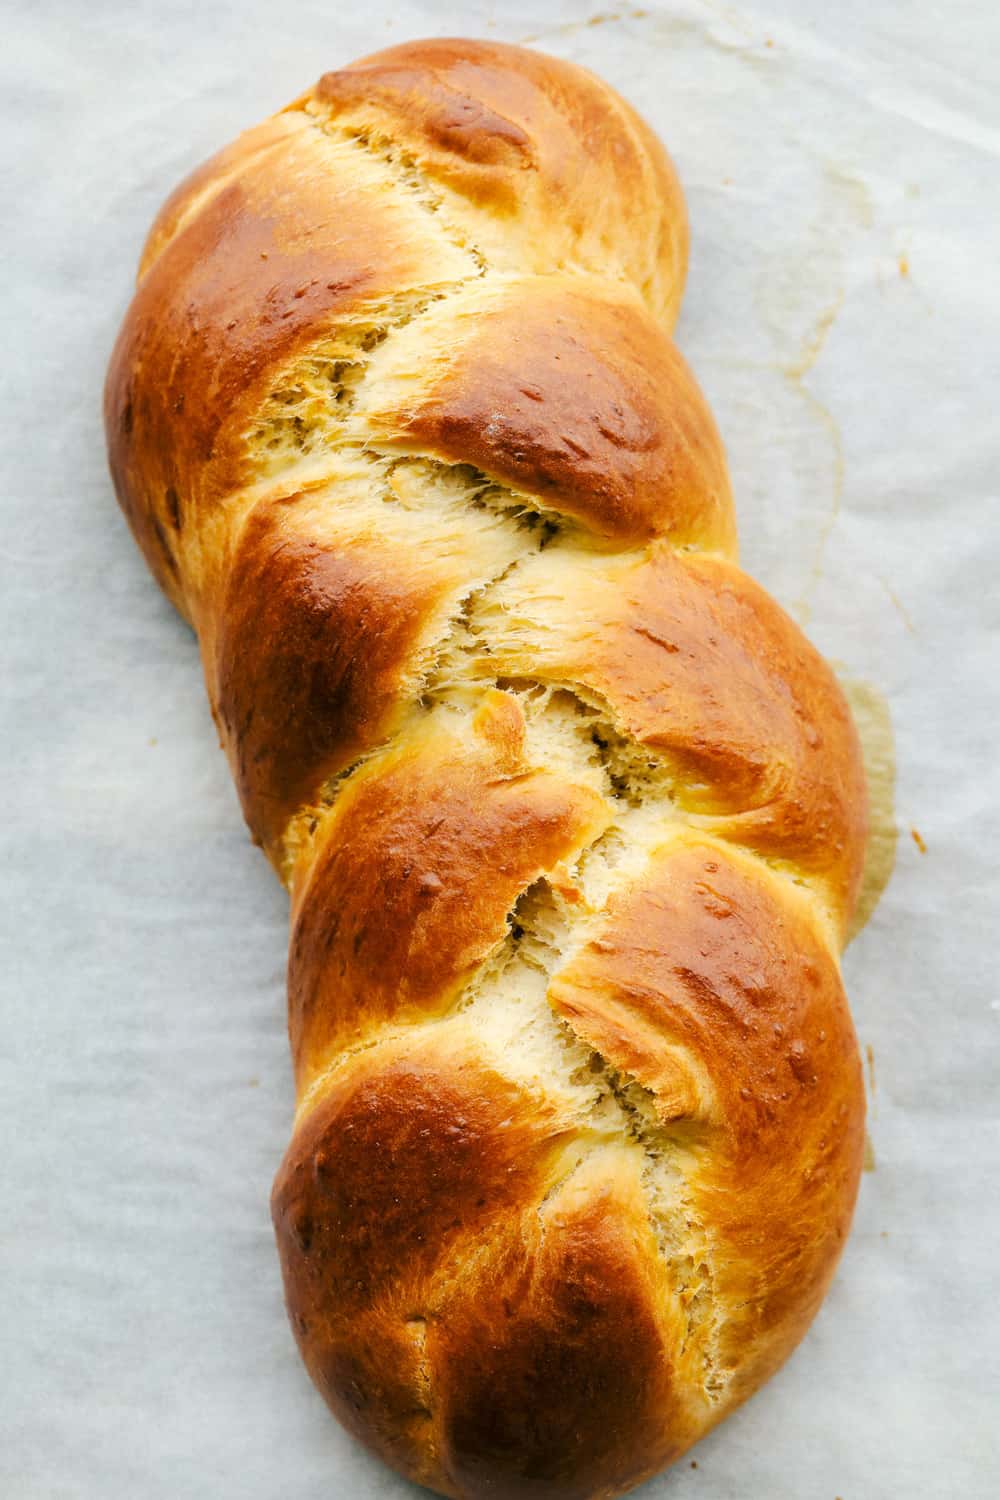 Golden brown baked challah bread. 